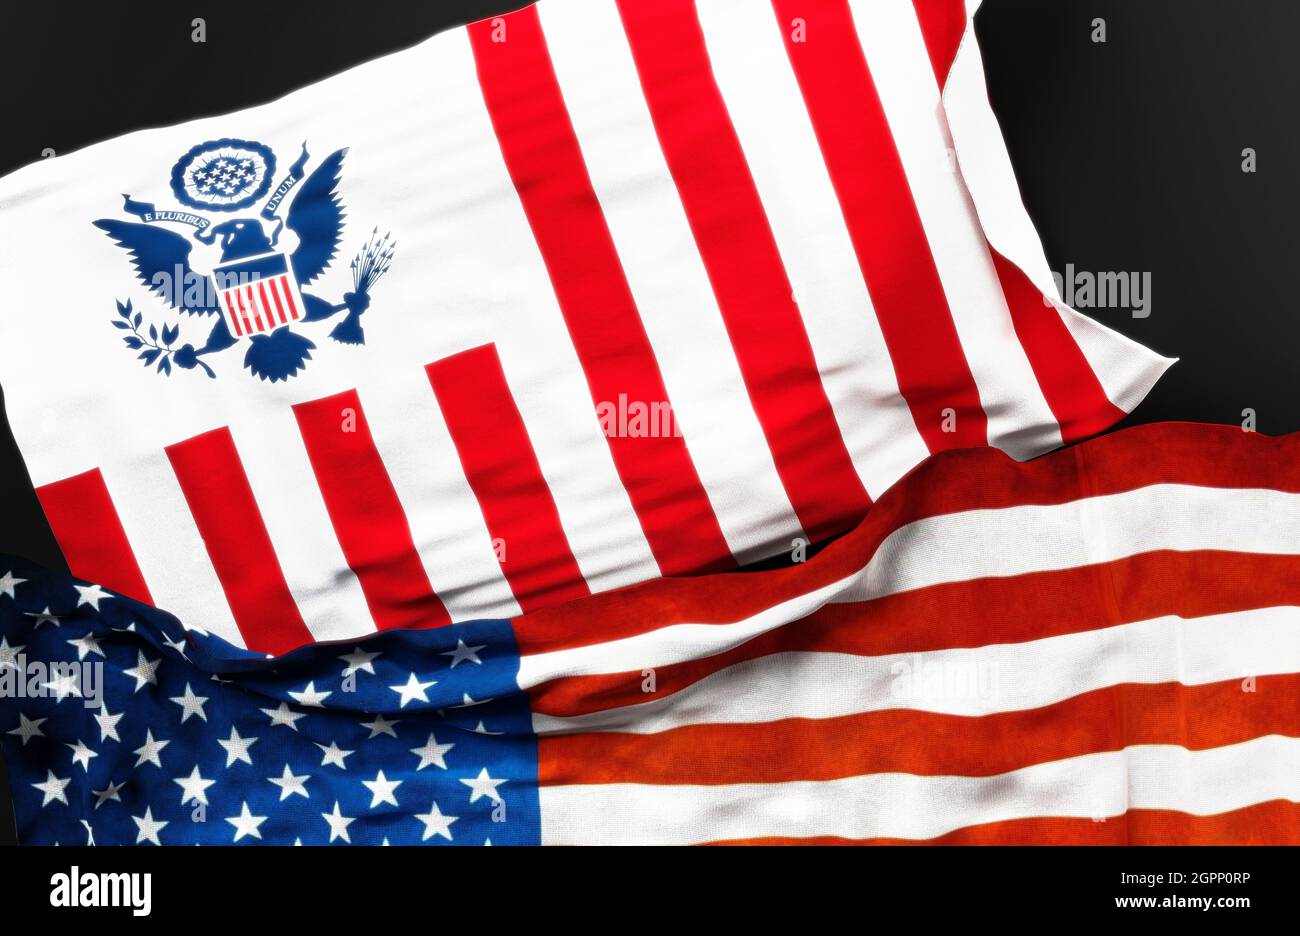 Flag of the United States Customs Service along with a flag of the United States of America as a symbol of a connection between them, 3d illustration Stock Photo